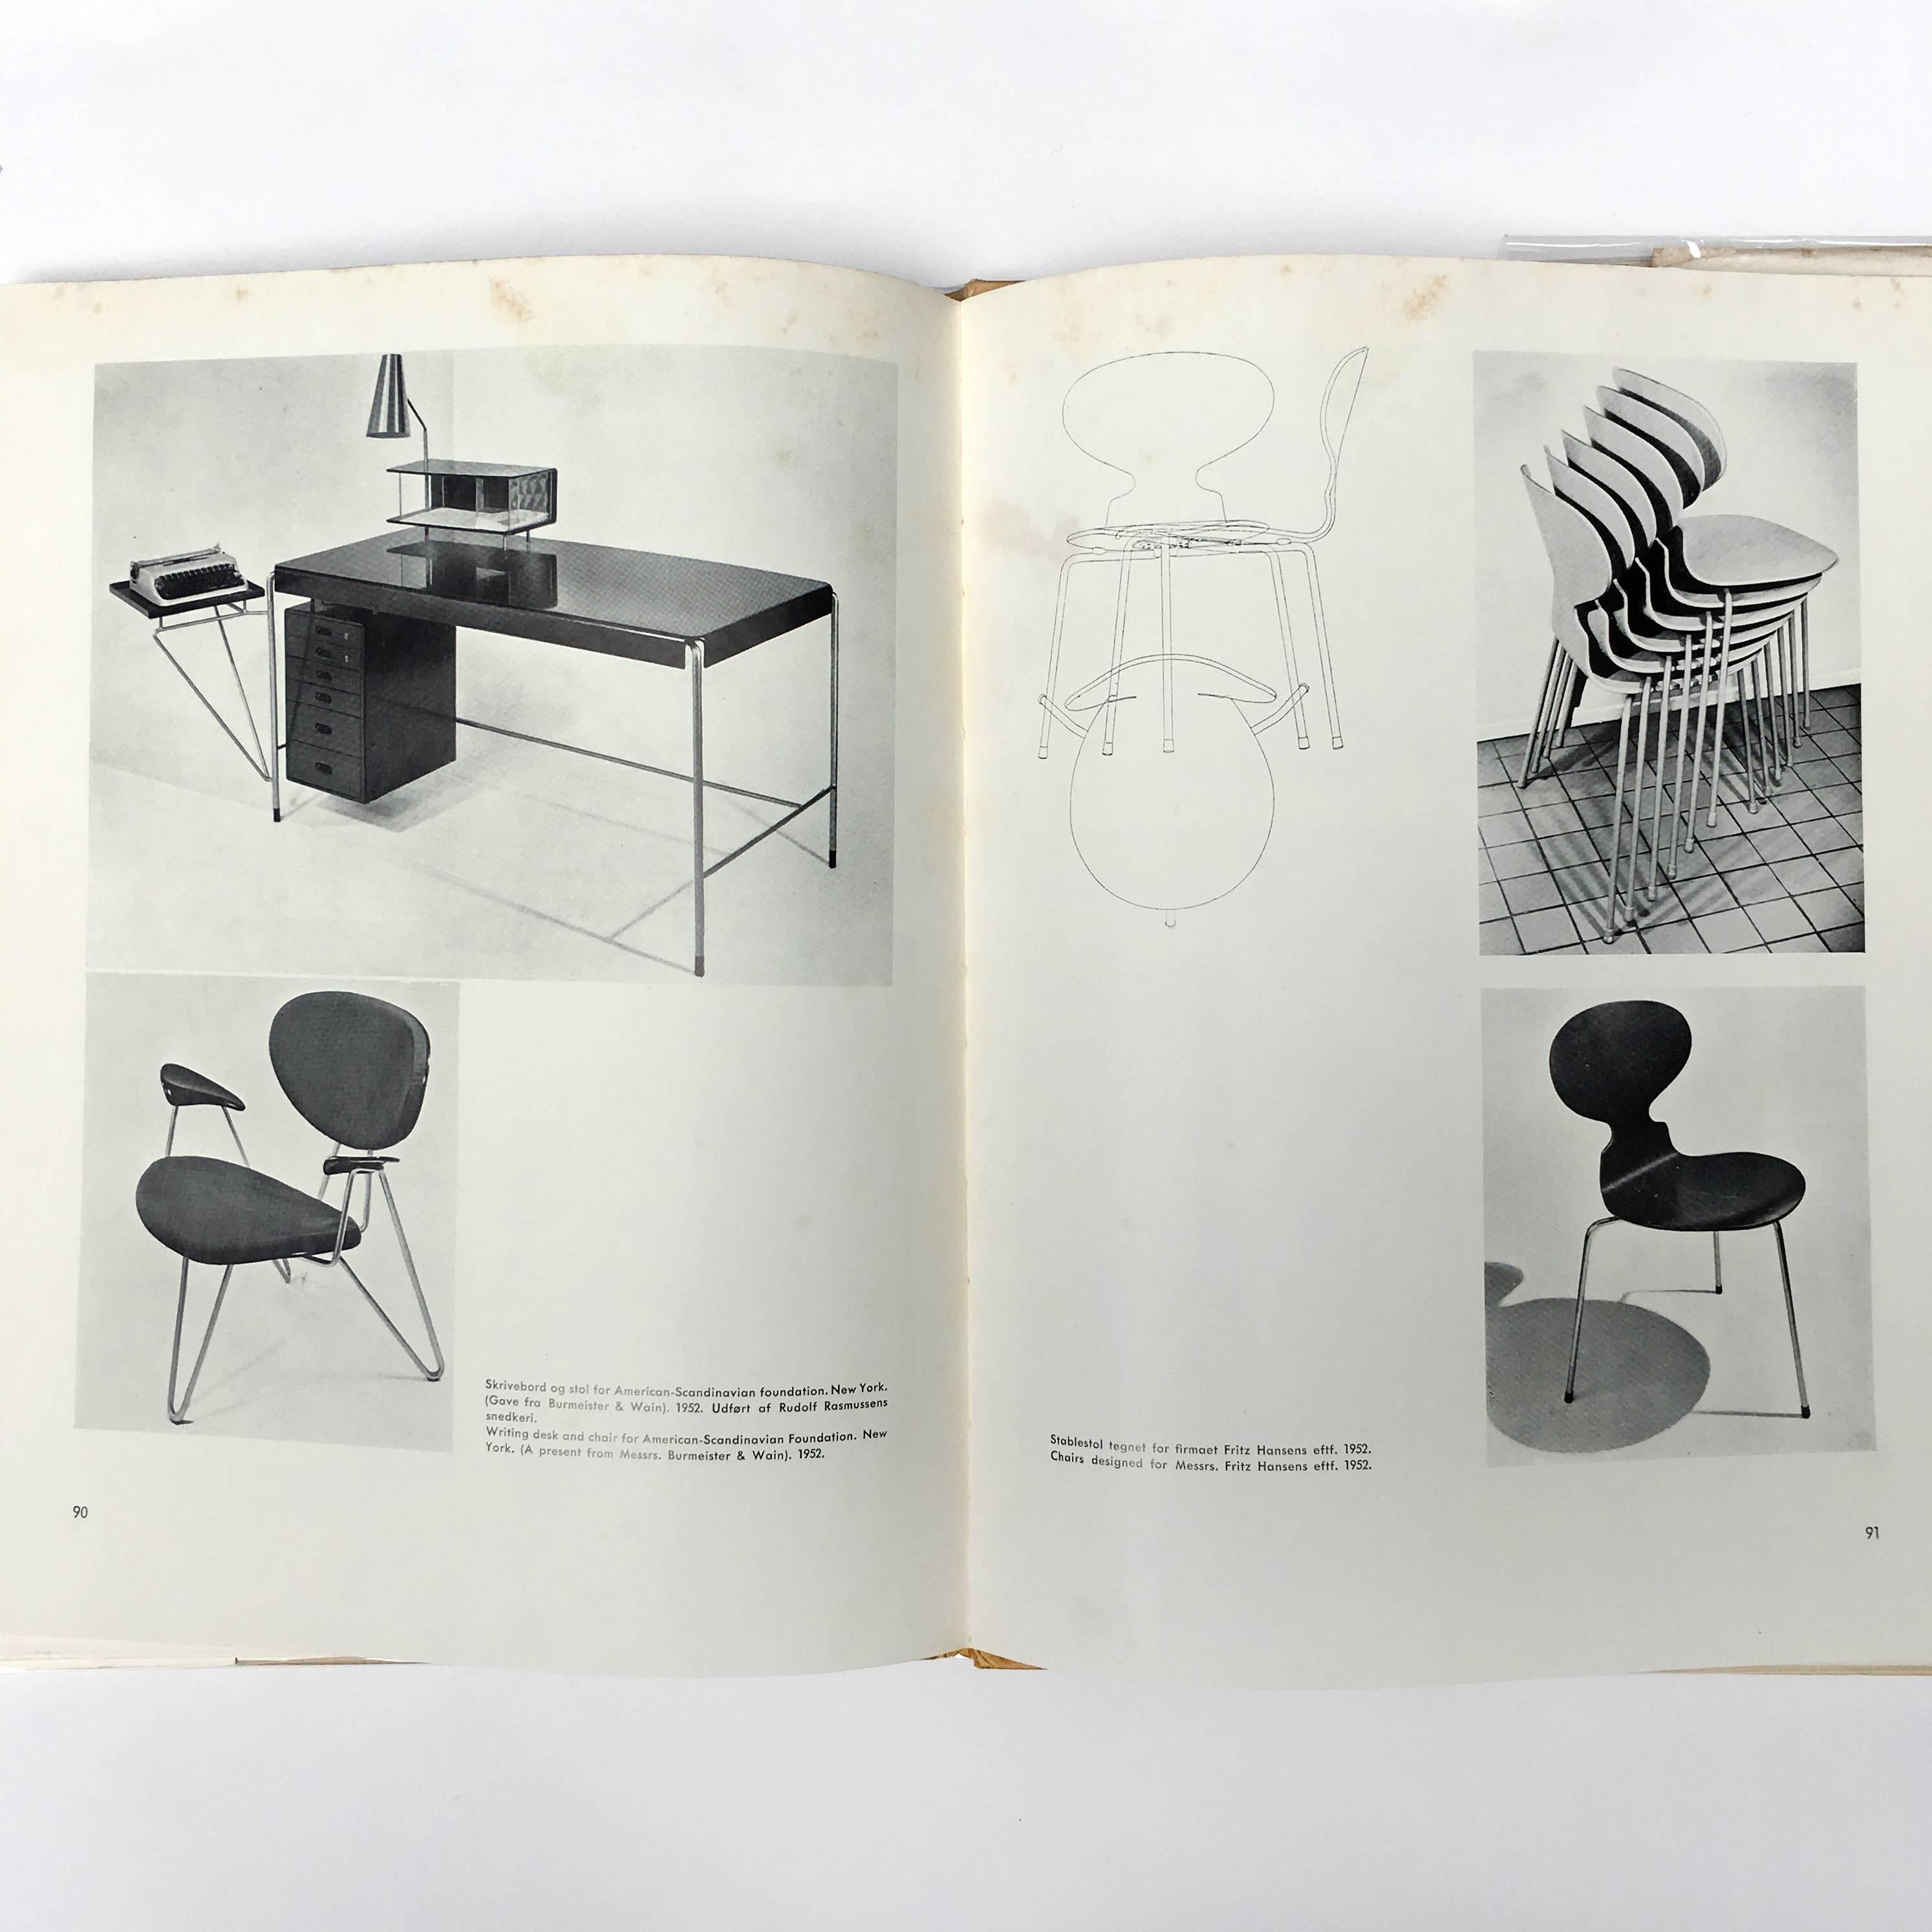 First edition, published by Arkitektens Forlag, København, 1954

Scarce, especially in its original dustjacket– this profusely illustrated monograph on the work of Arne Jacobsen by Johan Pedersen gives a concise, yet broad view of the architect’s